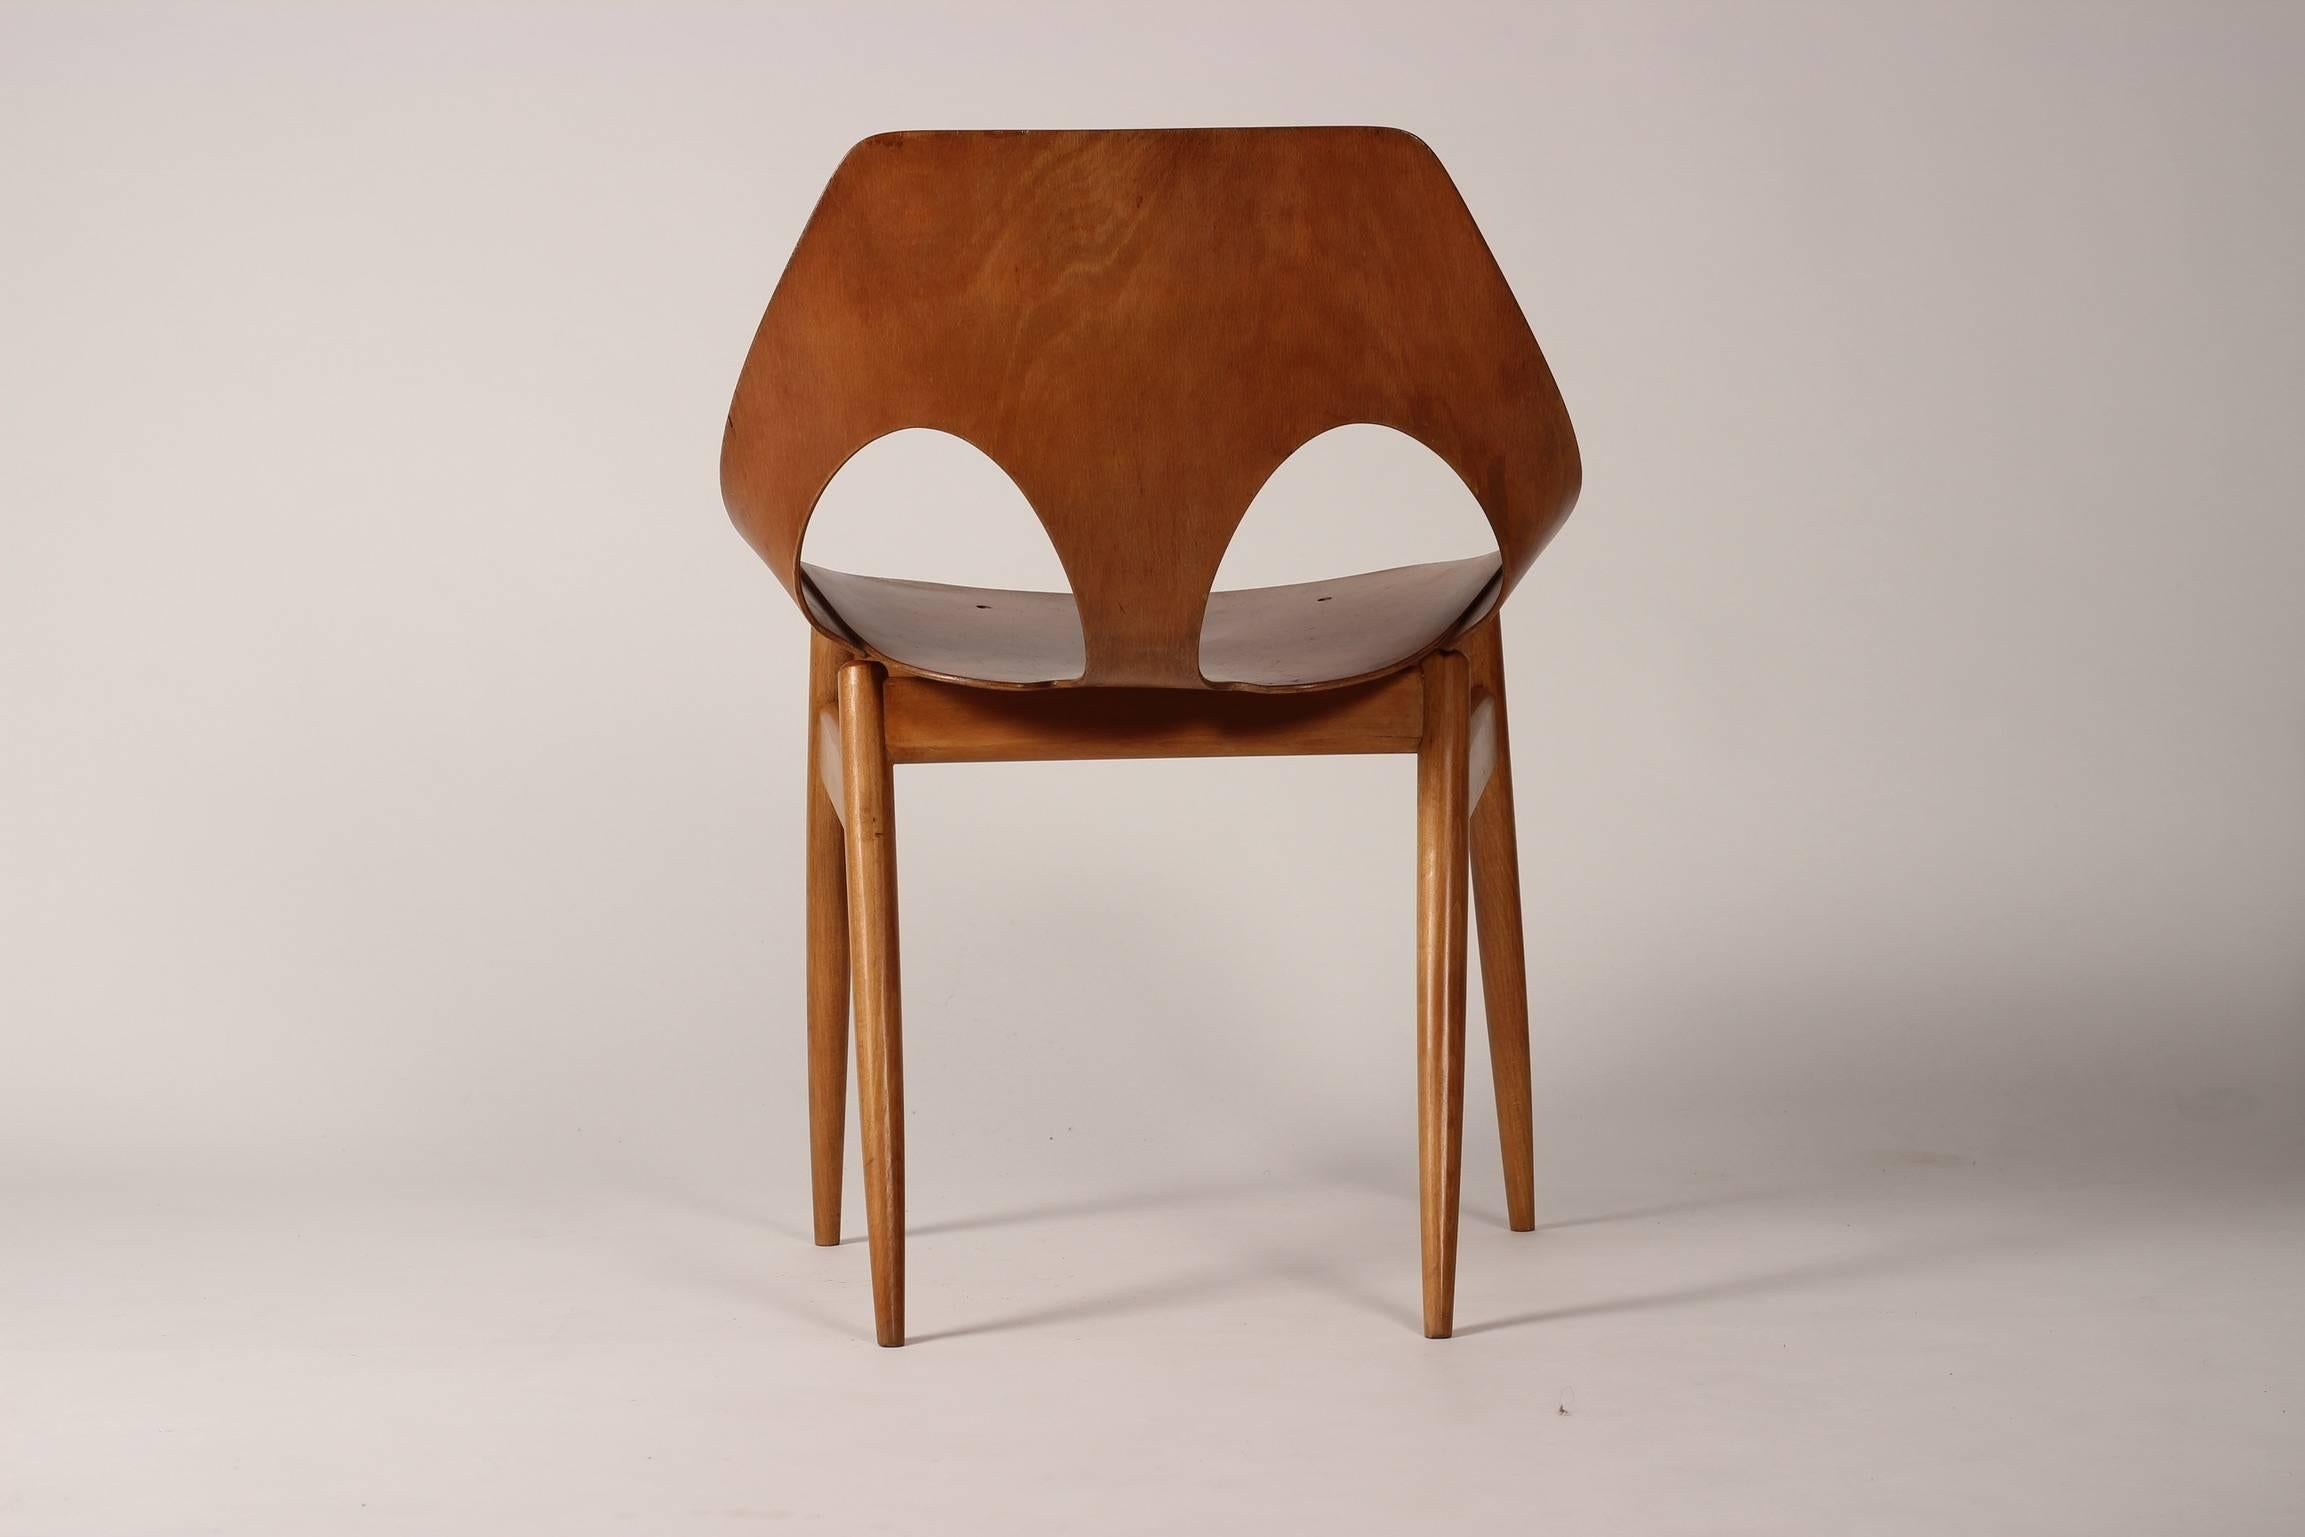 Held in the V&A collection in South Kensington London and featured in its recent show plywood: Material of the modern world, this lightweight, stackable, chair with gently tapering, splayed wooden legs are typical of the language of Danish designers